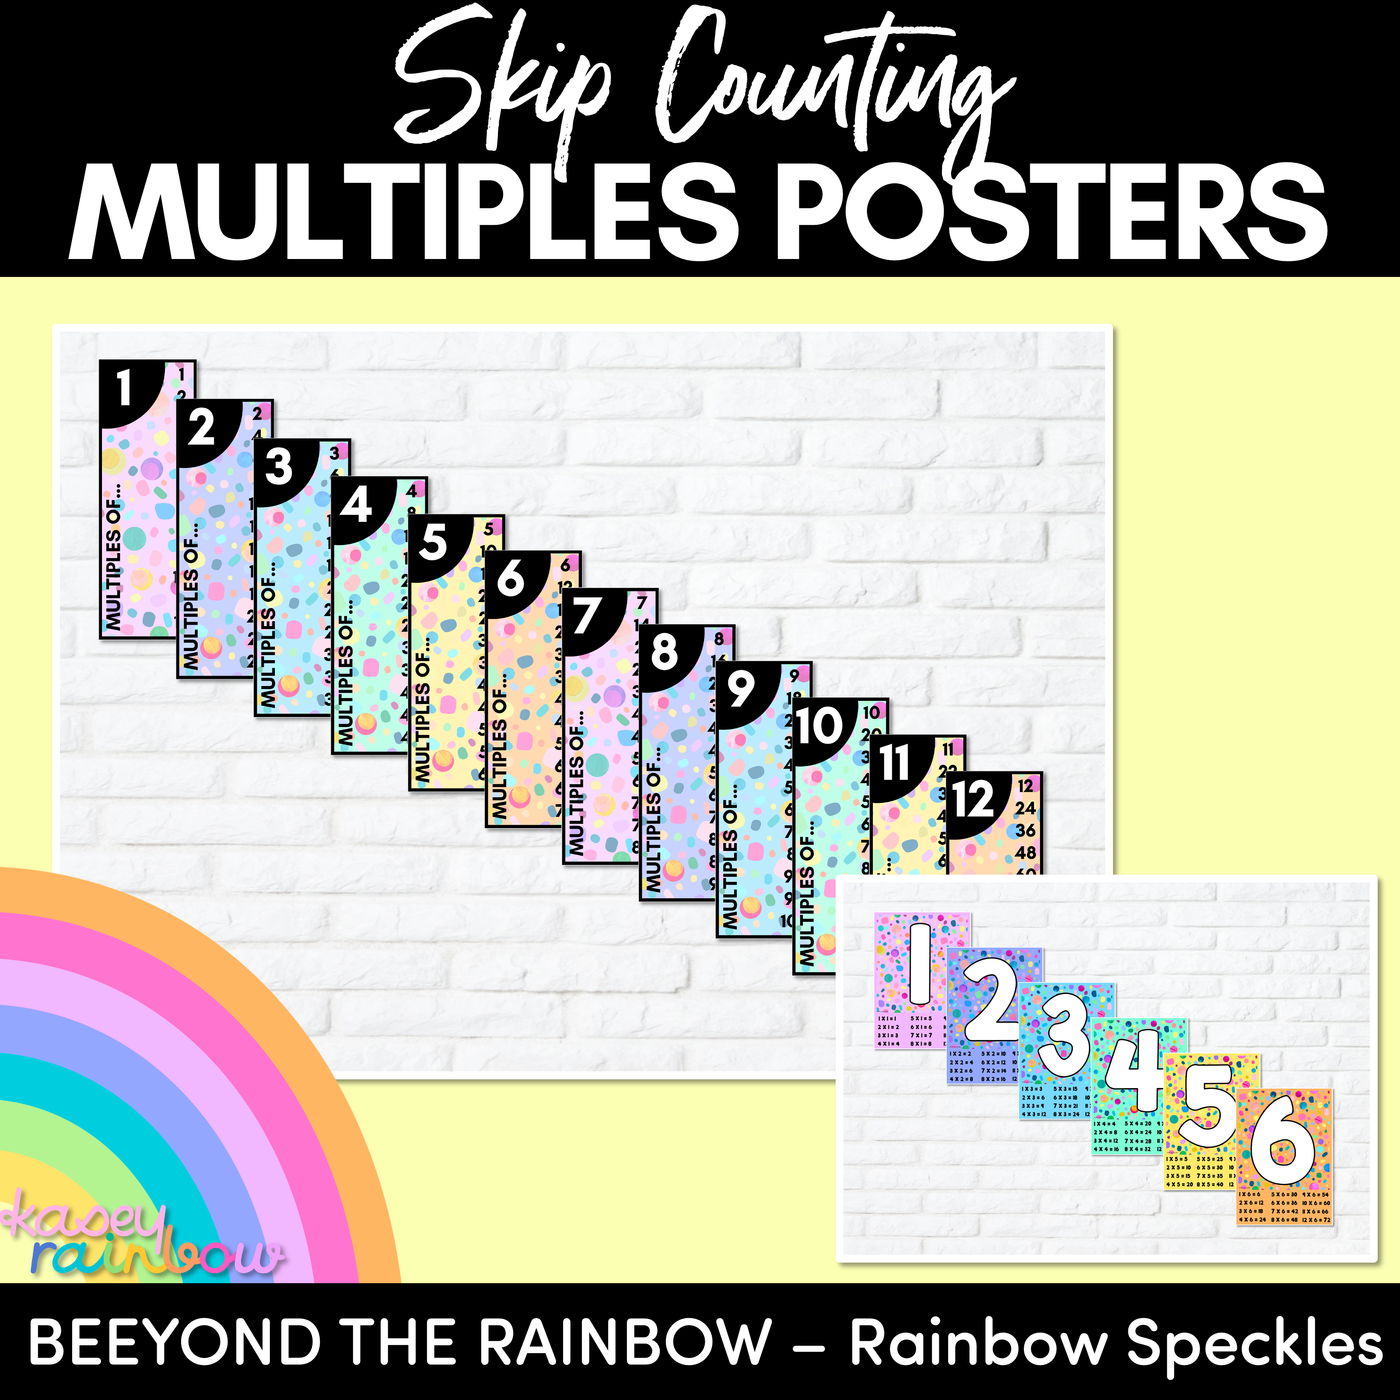 MULTIPLES & SKIP COUNTING POSTERS - The Kasey Rainbow Collection - Rainbow Speckles